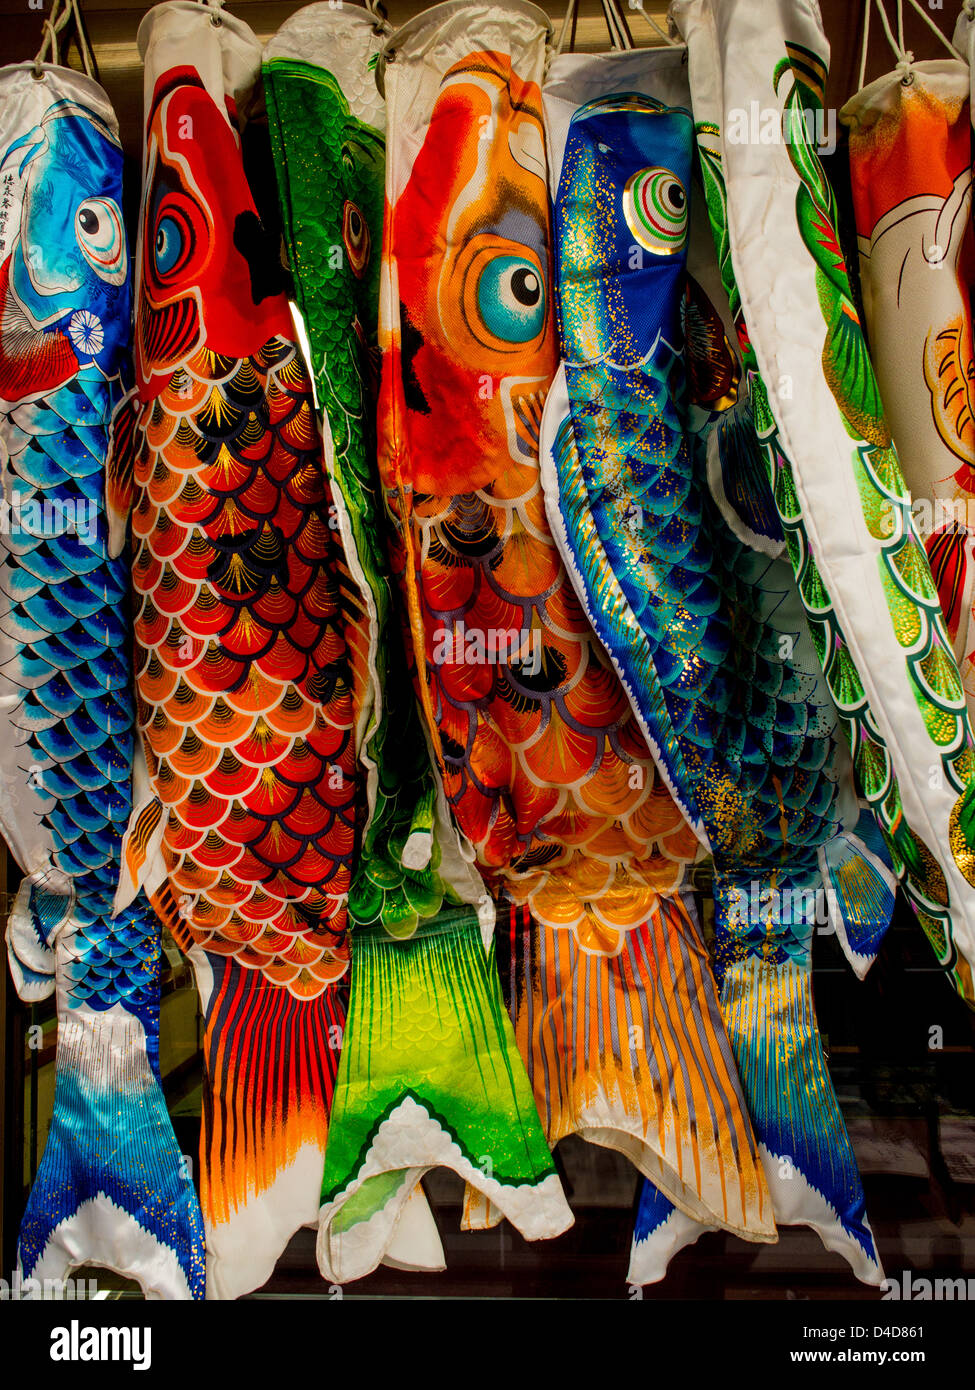 Colorful  koinoborri, carp streamers, flown to celebrate a traditional Japanese children's festival hanging outside a shop. Stock Photo